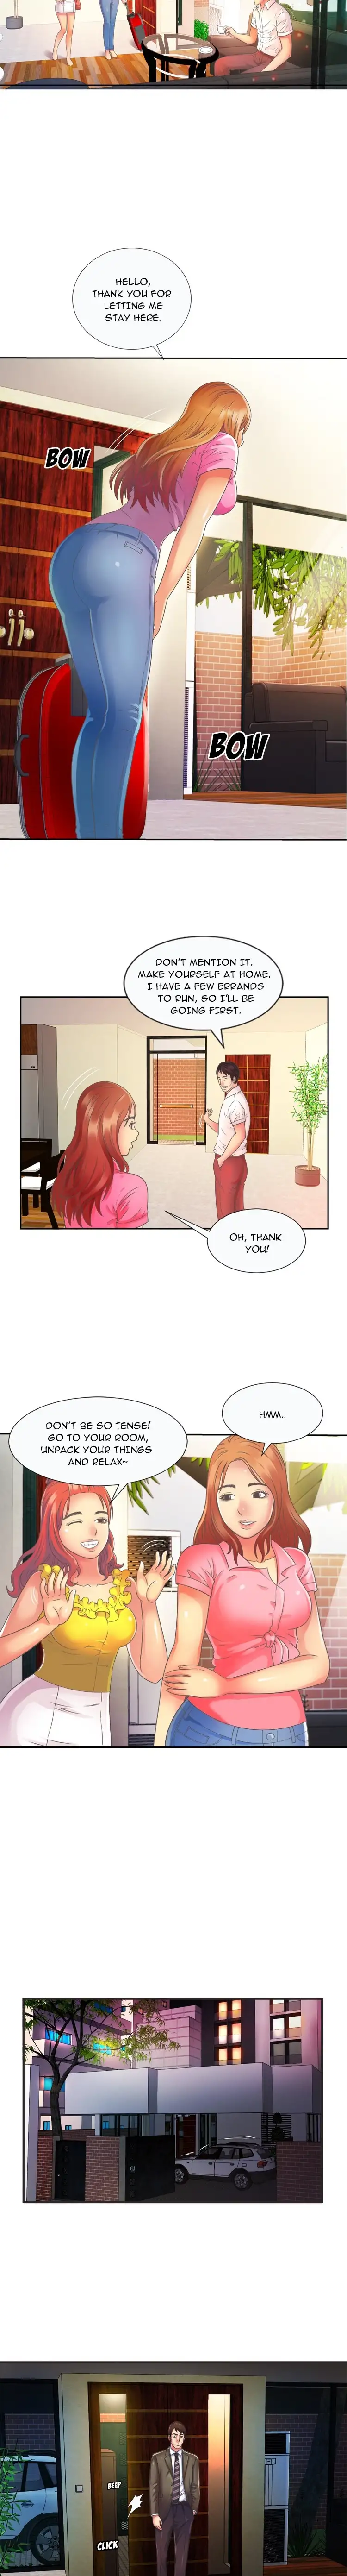 My Friend’s Dad - Chapter 0 Page 4